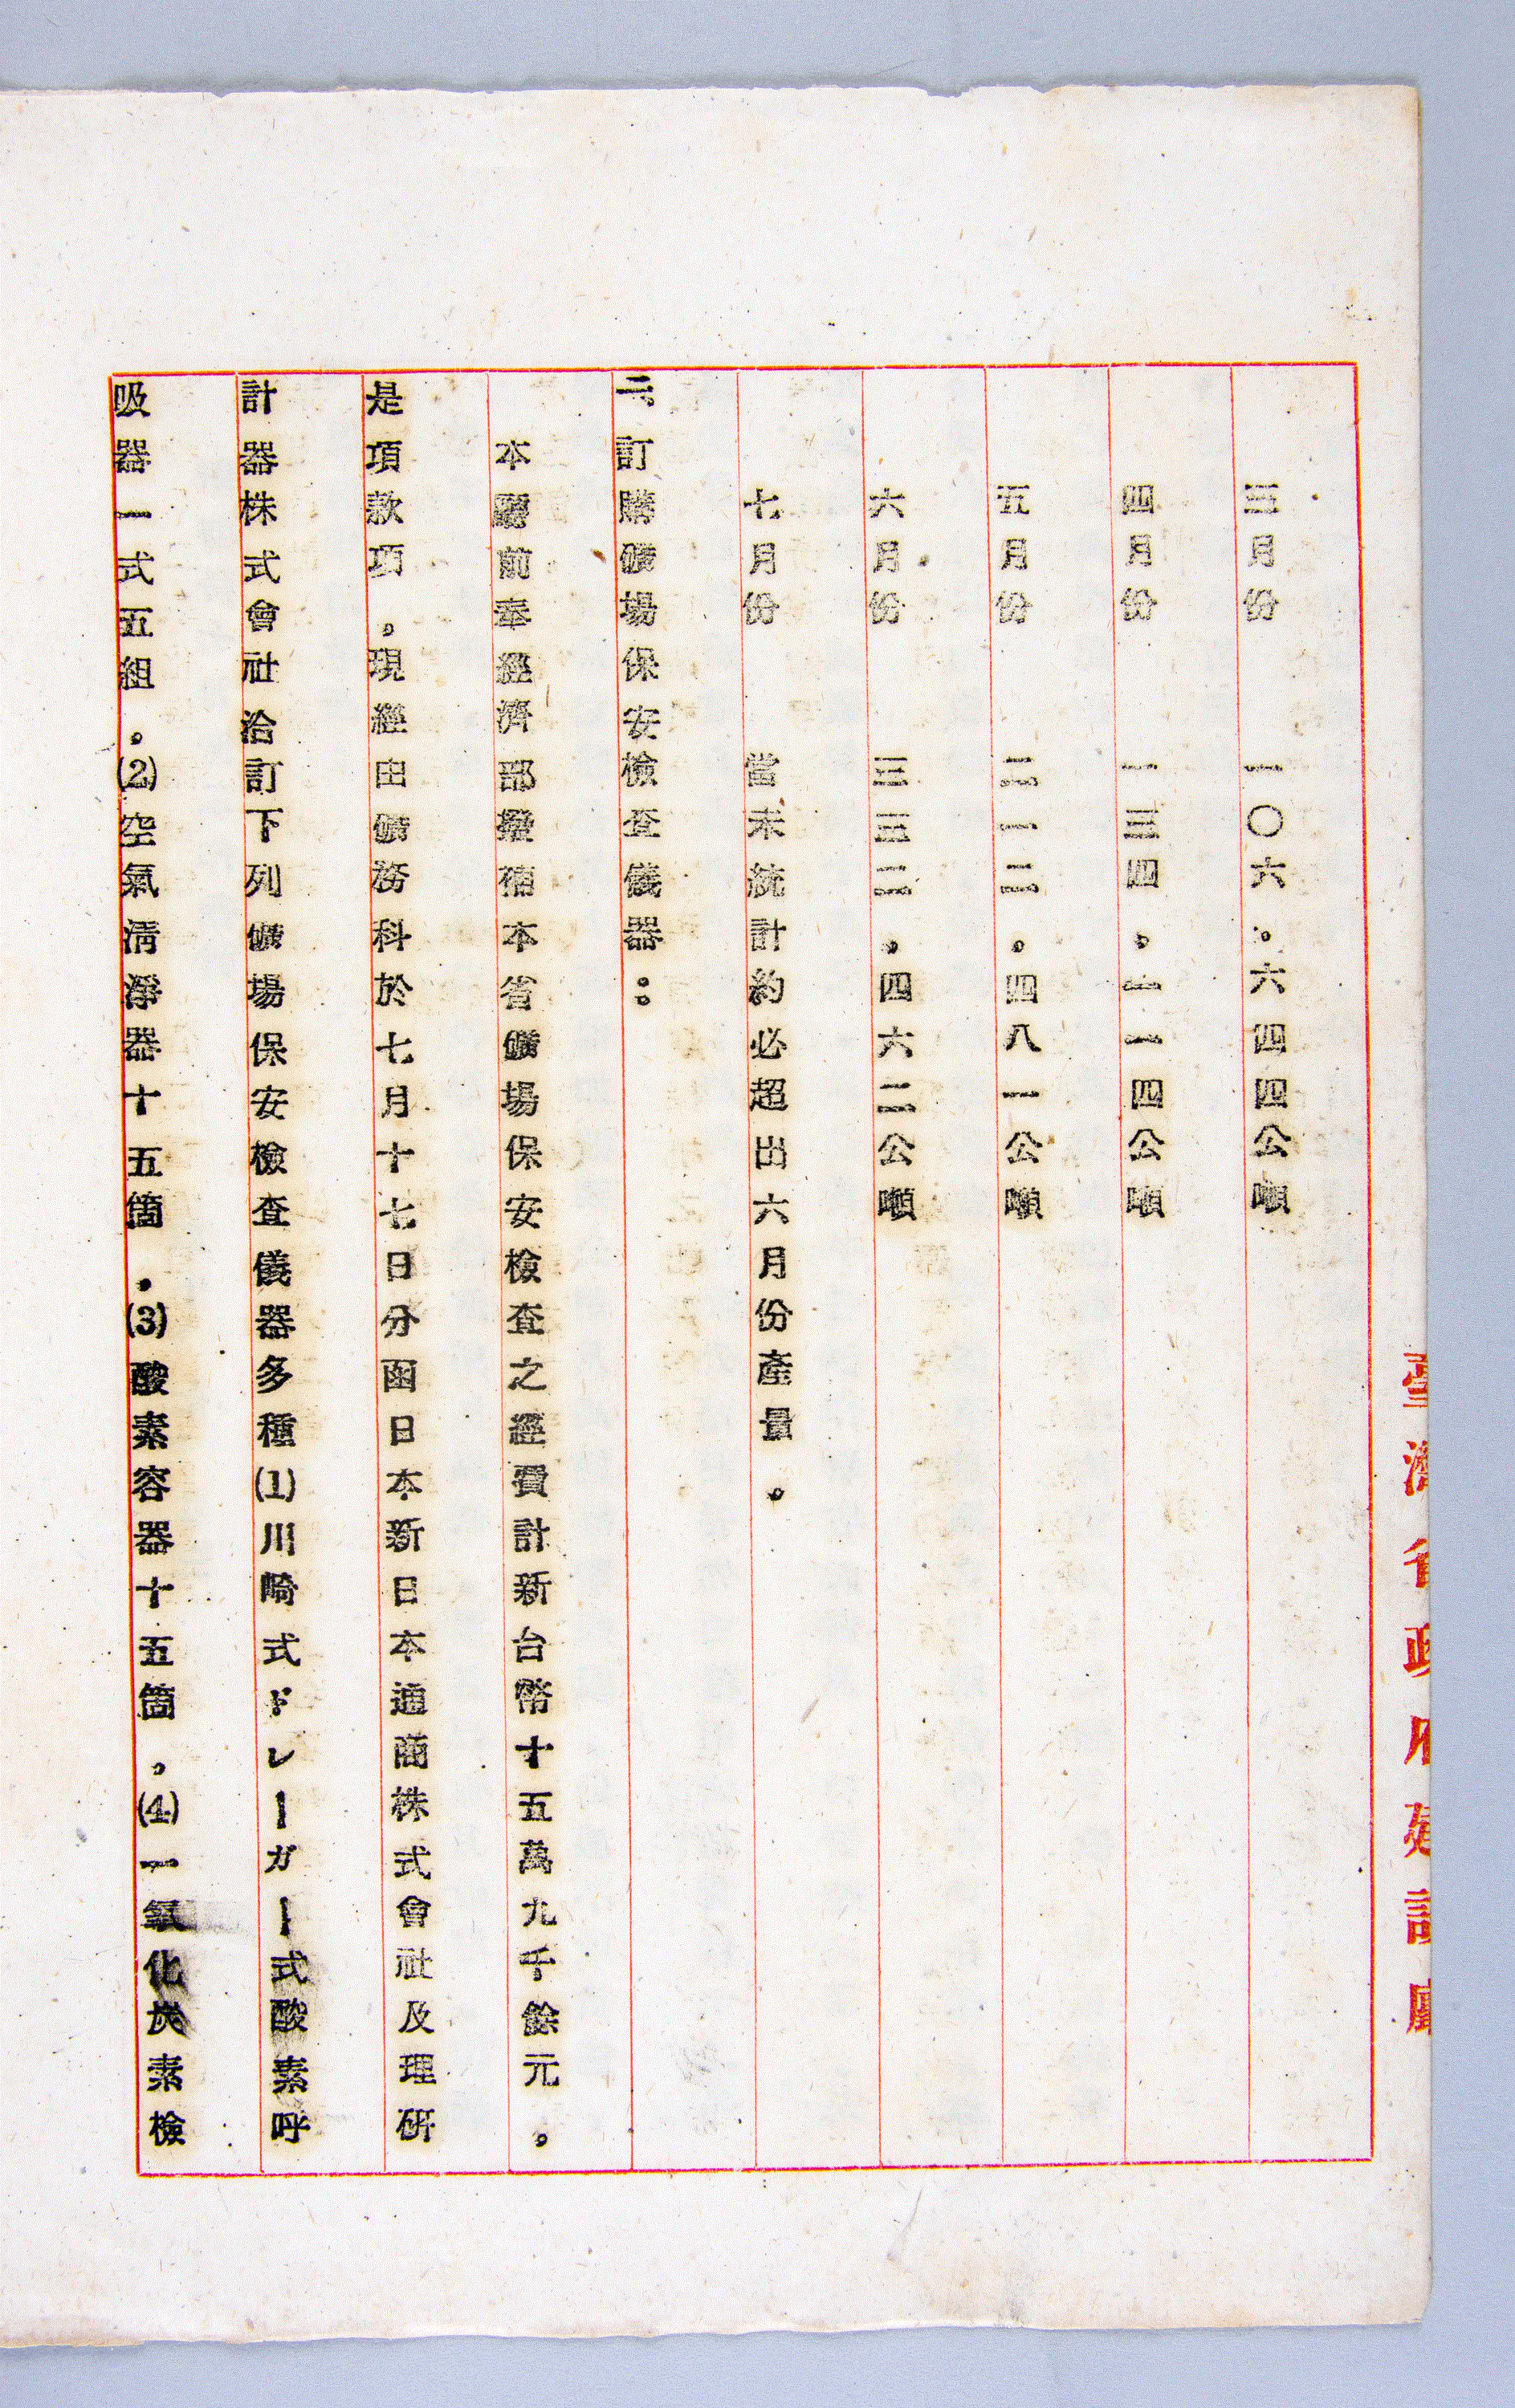 The report of the Economic Development Bureau of Taiwan Provincial Government in 1951